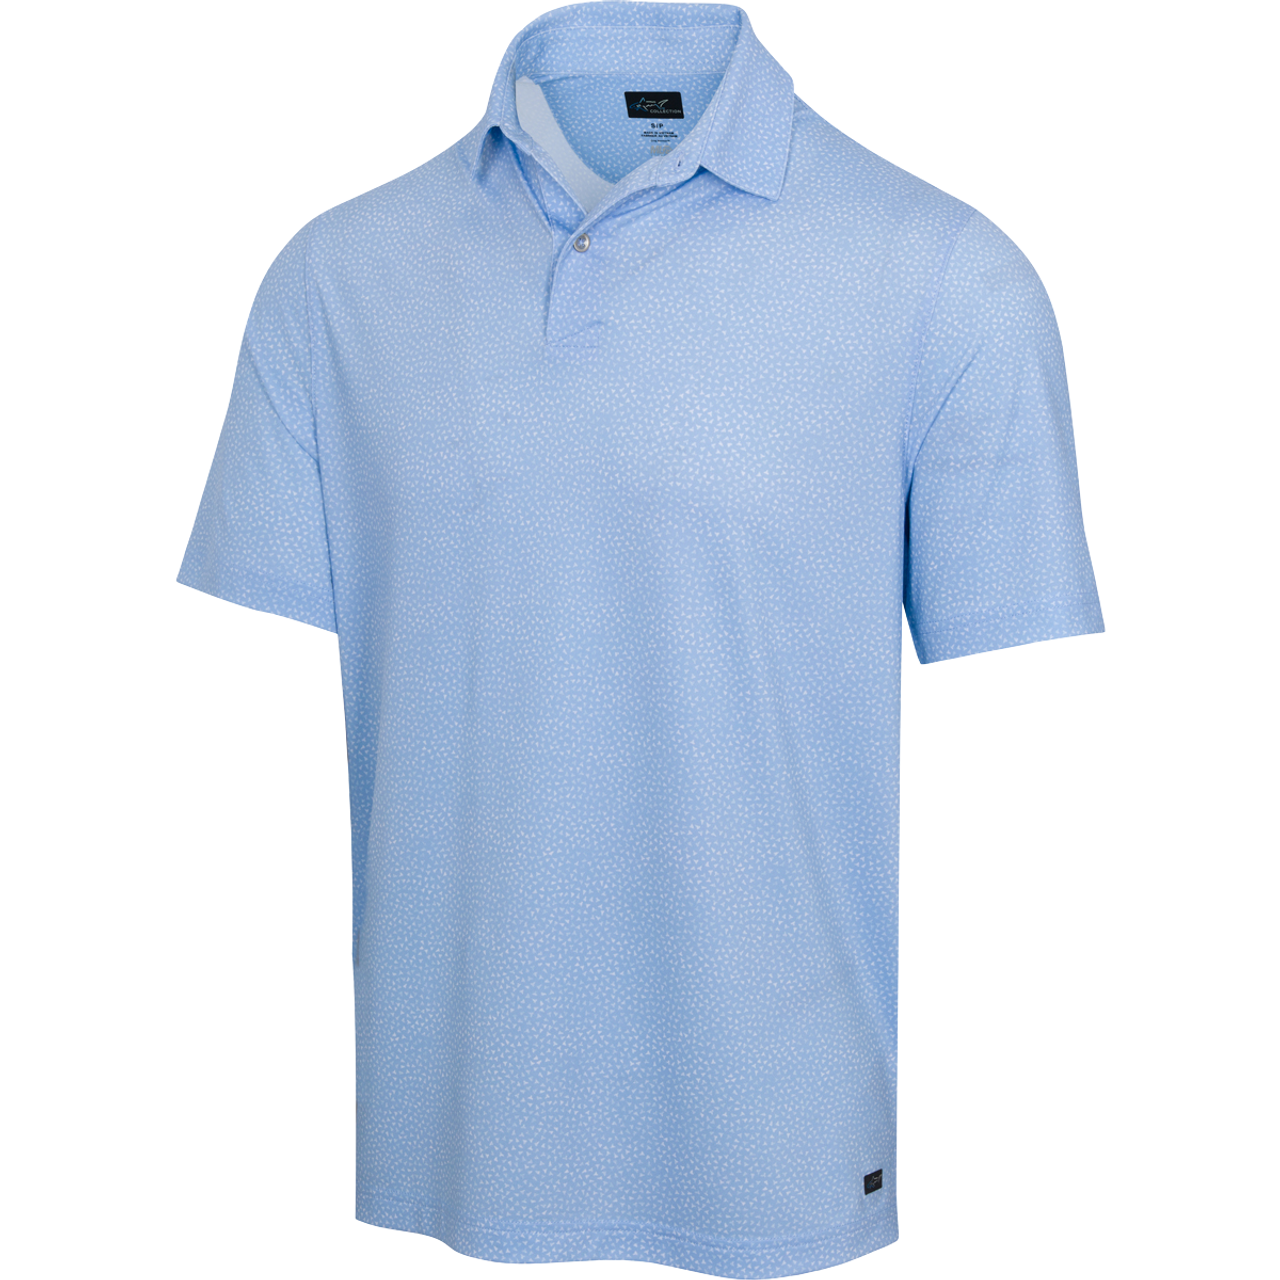 ML75 Fossil Shark Stretch Polo - Greg Norman Collection